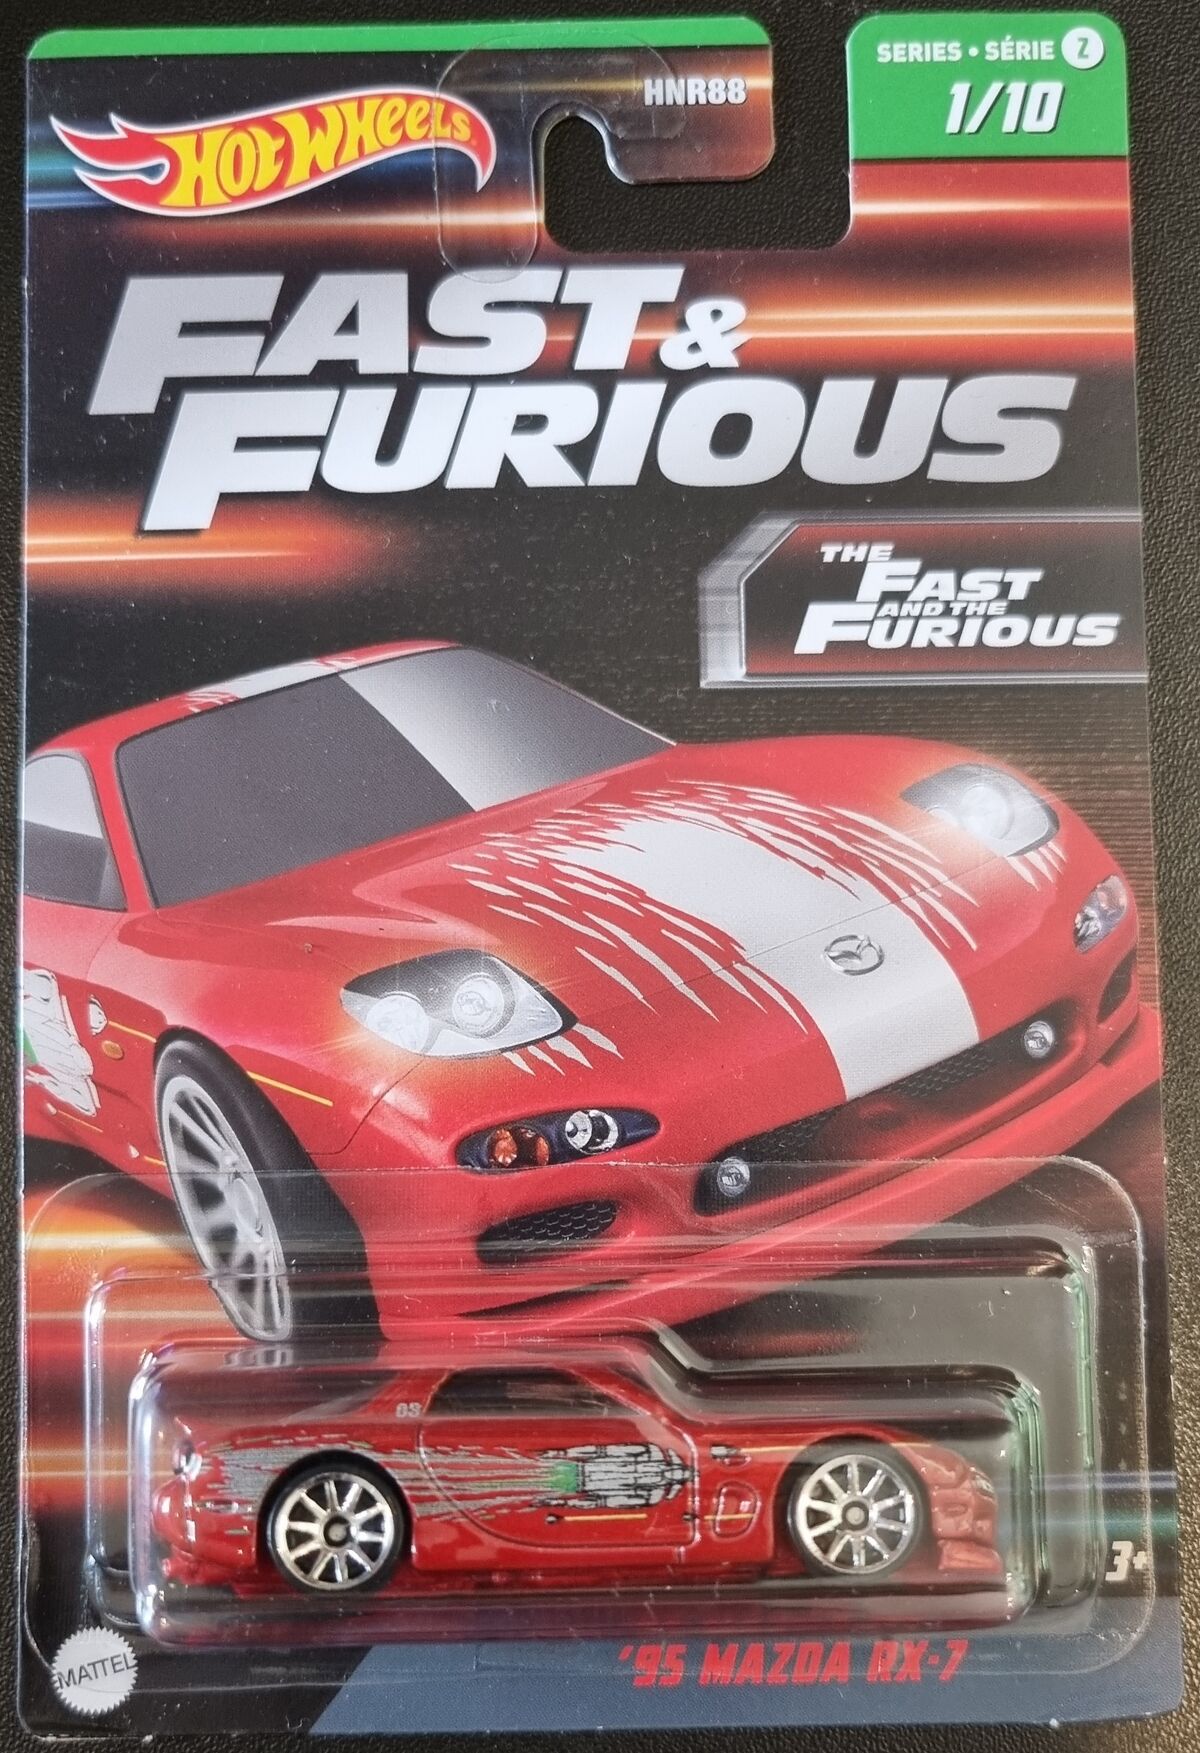 Hot Wheels Fast and Furious Themed